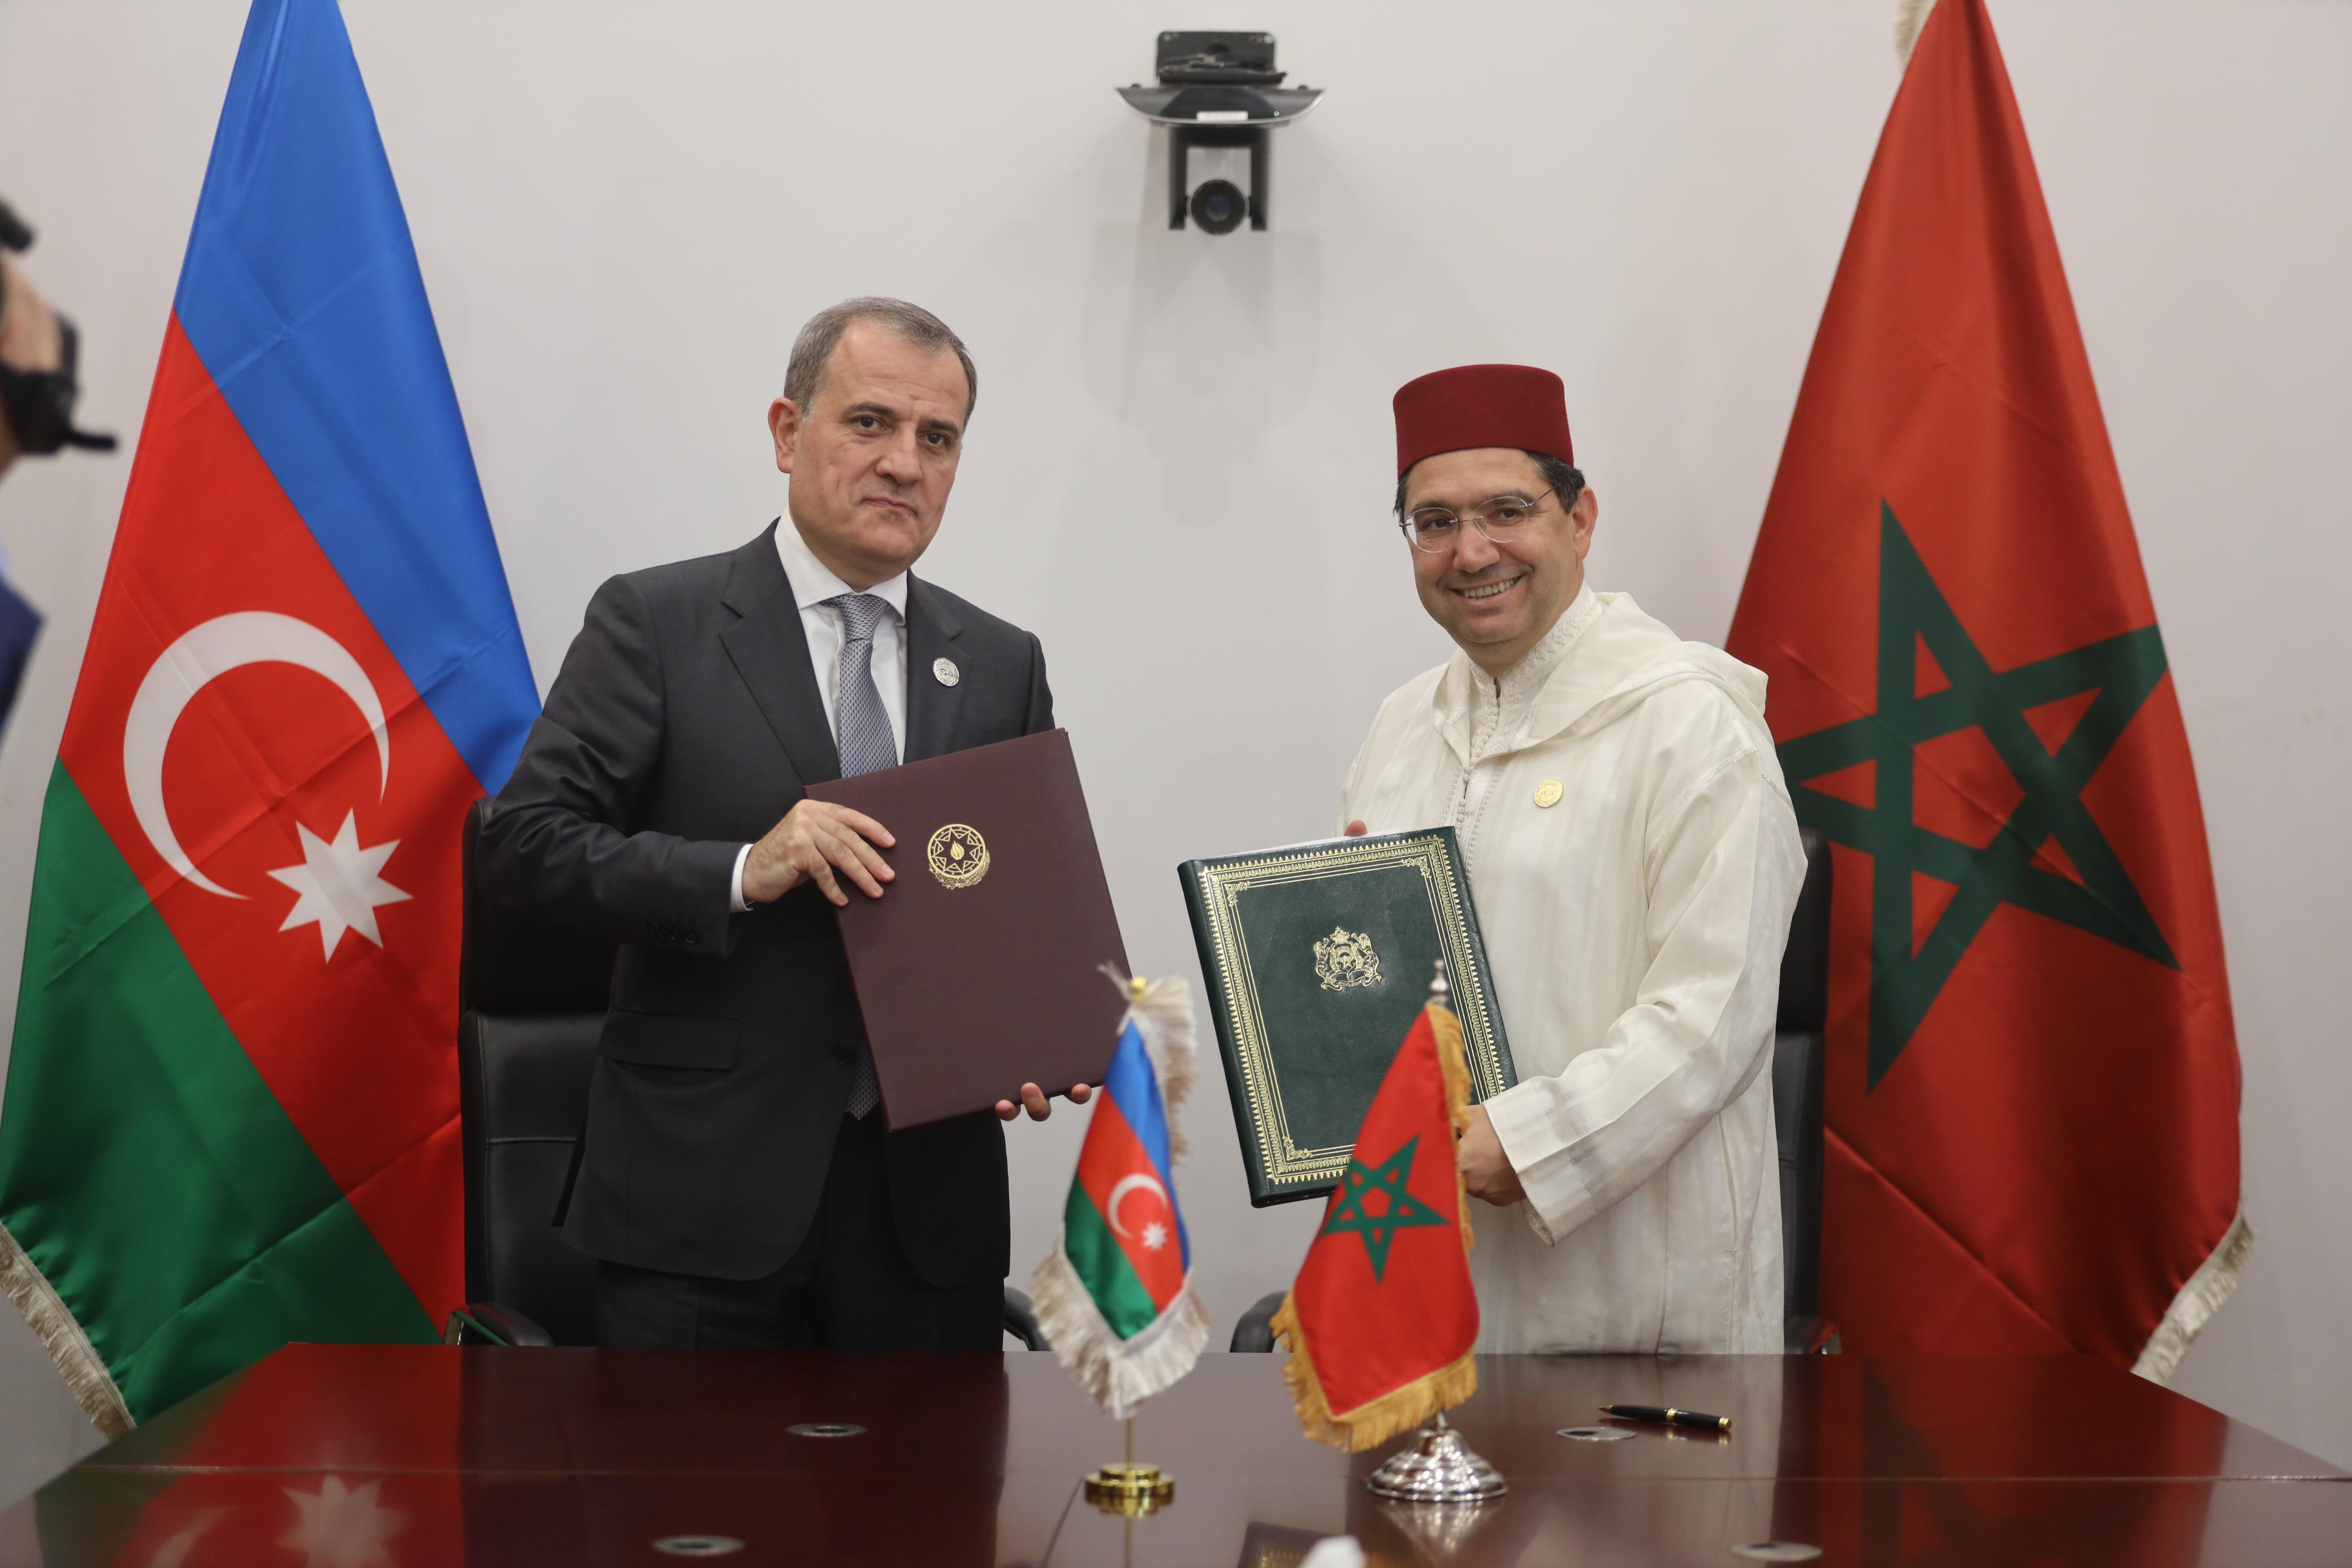 Morocco and Azerbaijan signed a joint agreement on the abolition of visas